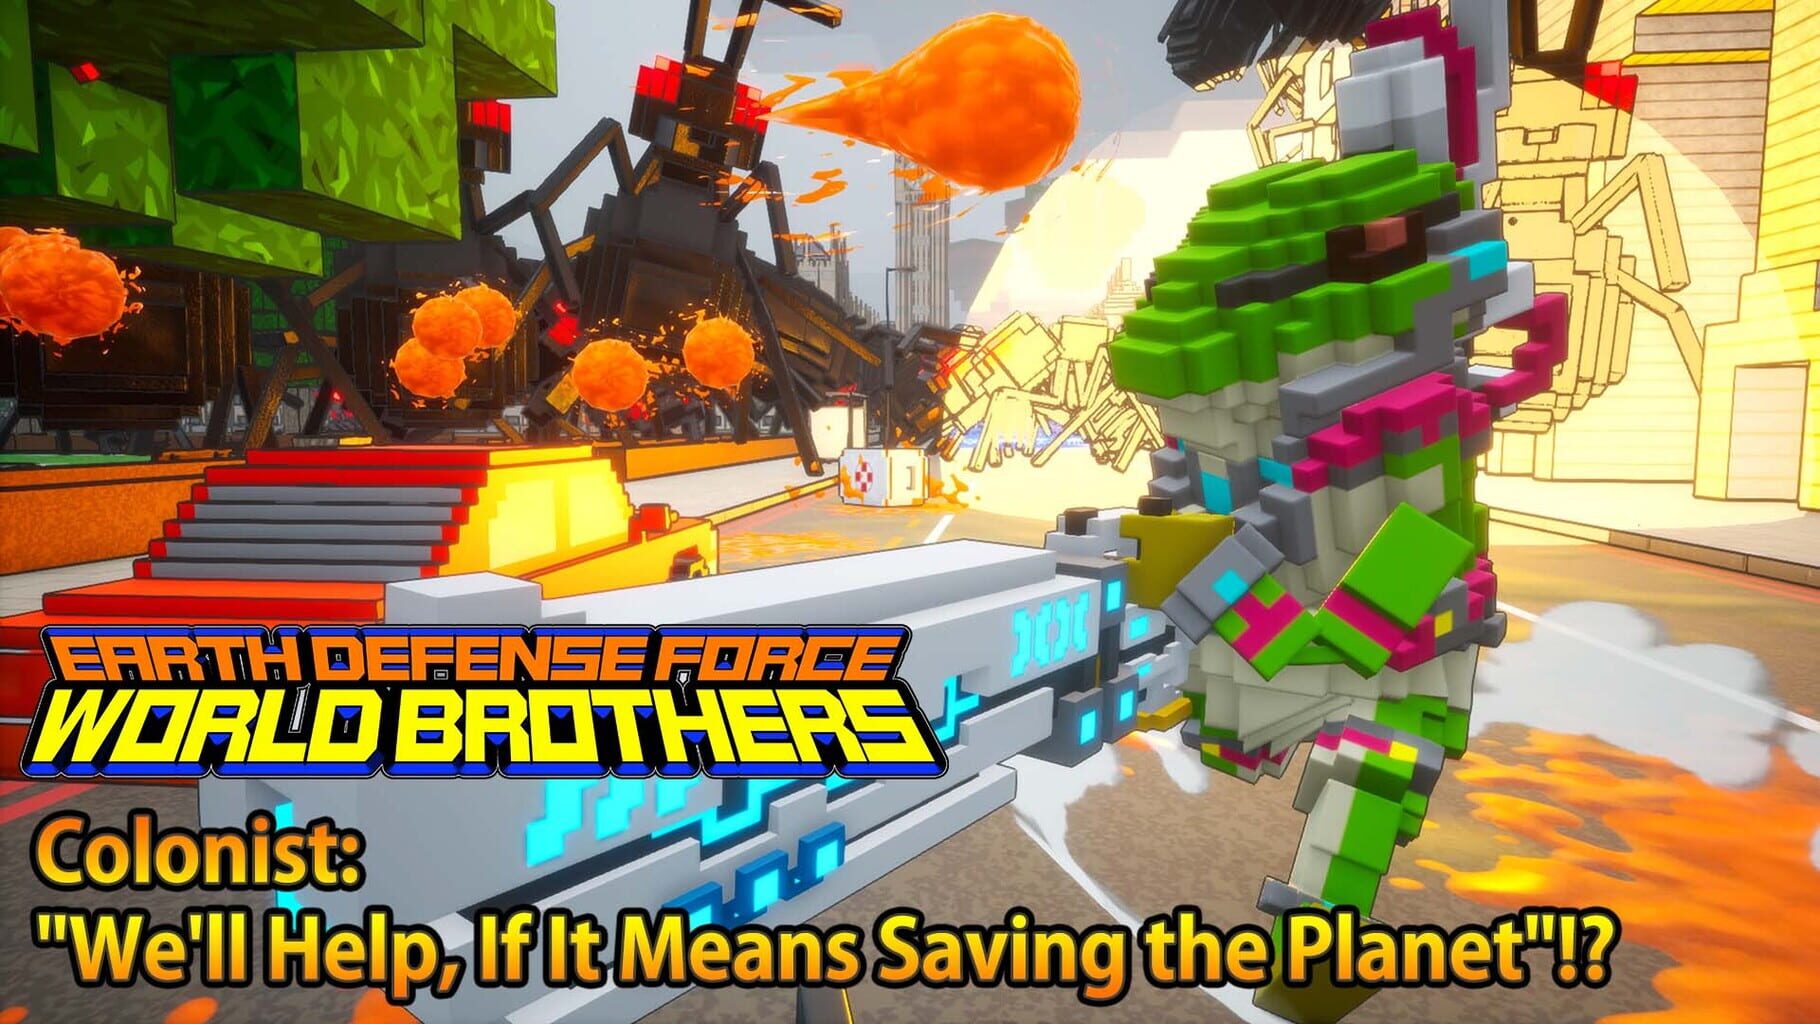 Earth Defense Force: World Brothers - Colonist: "We'll Help, If It Means Saving the Planet"!? artwork